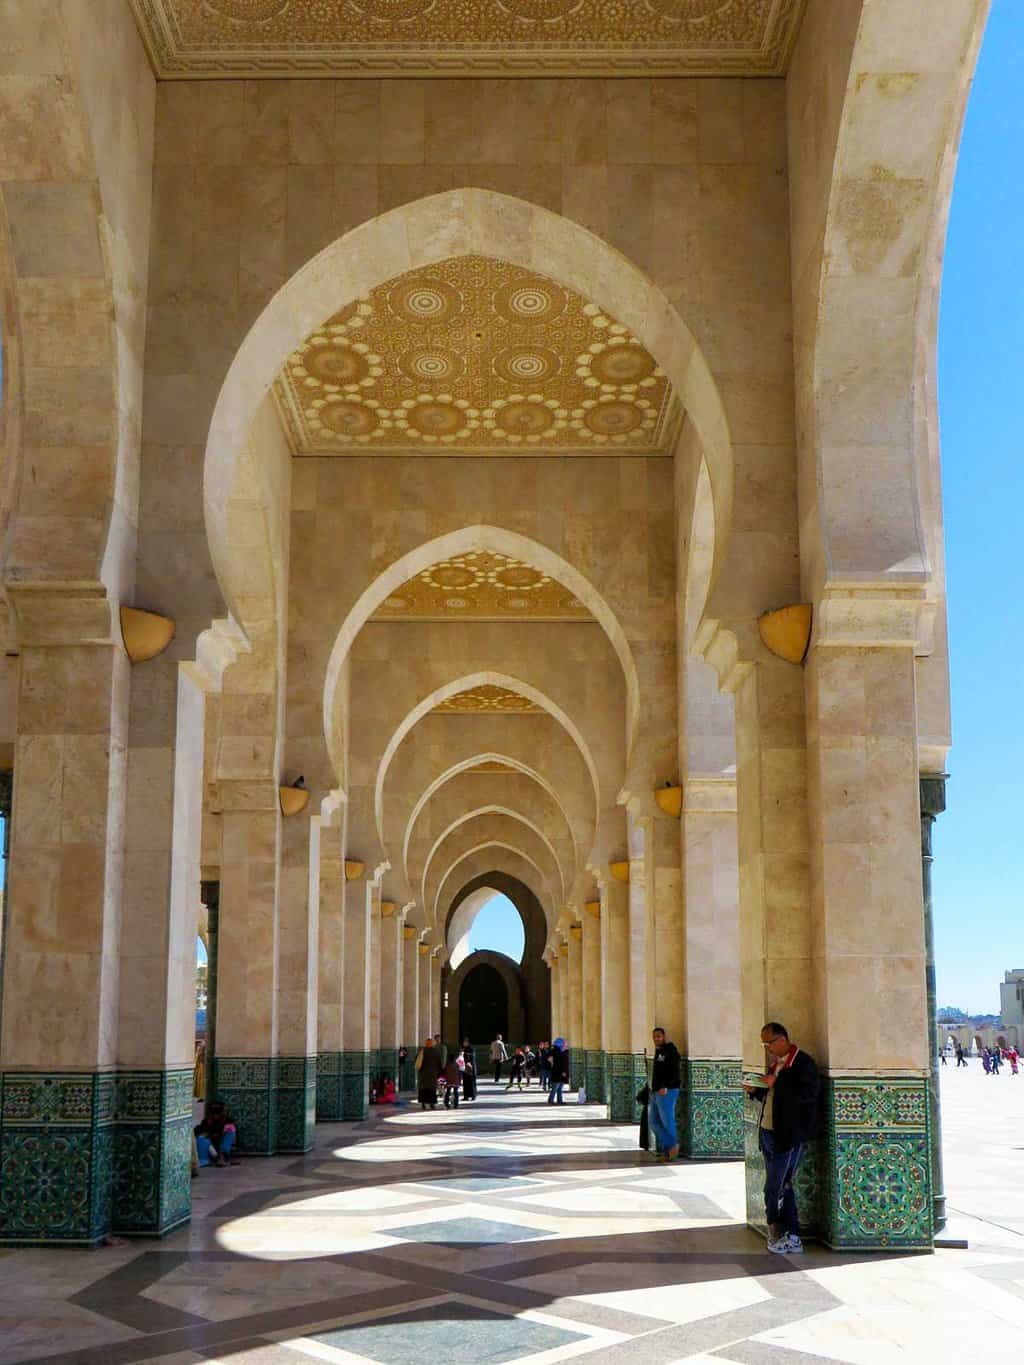 An arched covered walkway with intricate designs covering a patterned marble floor outside the Mosque in Casablanca. 